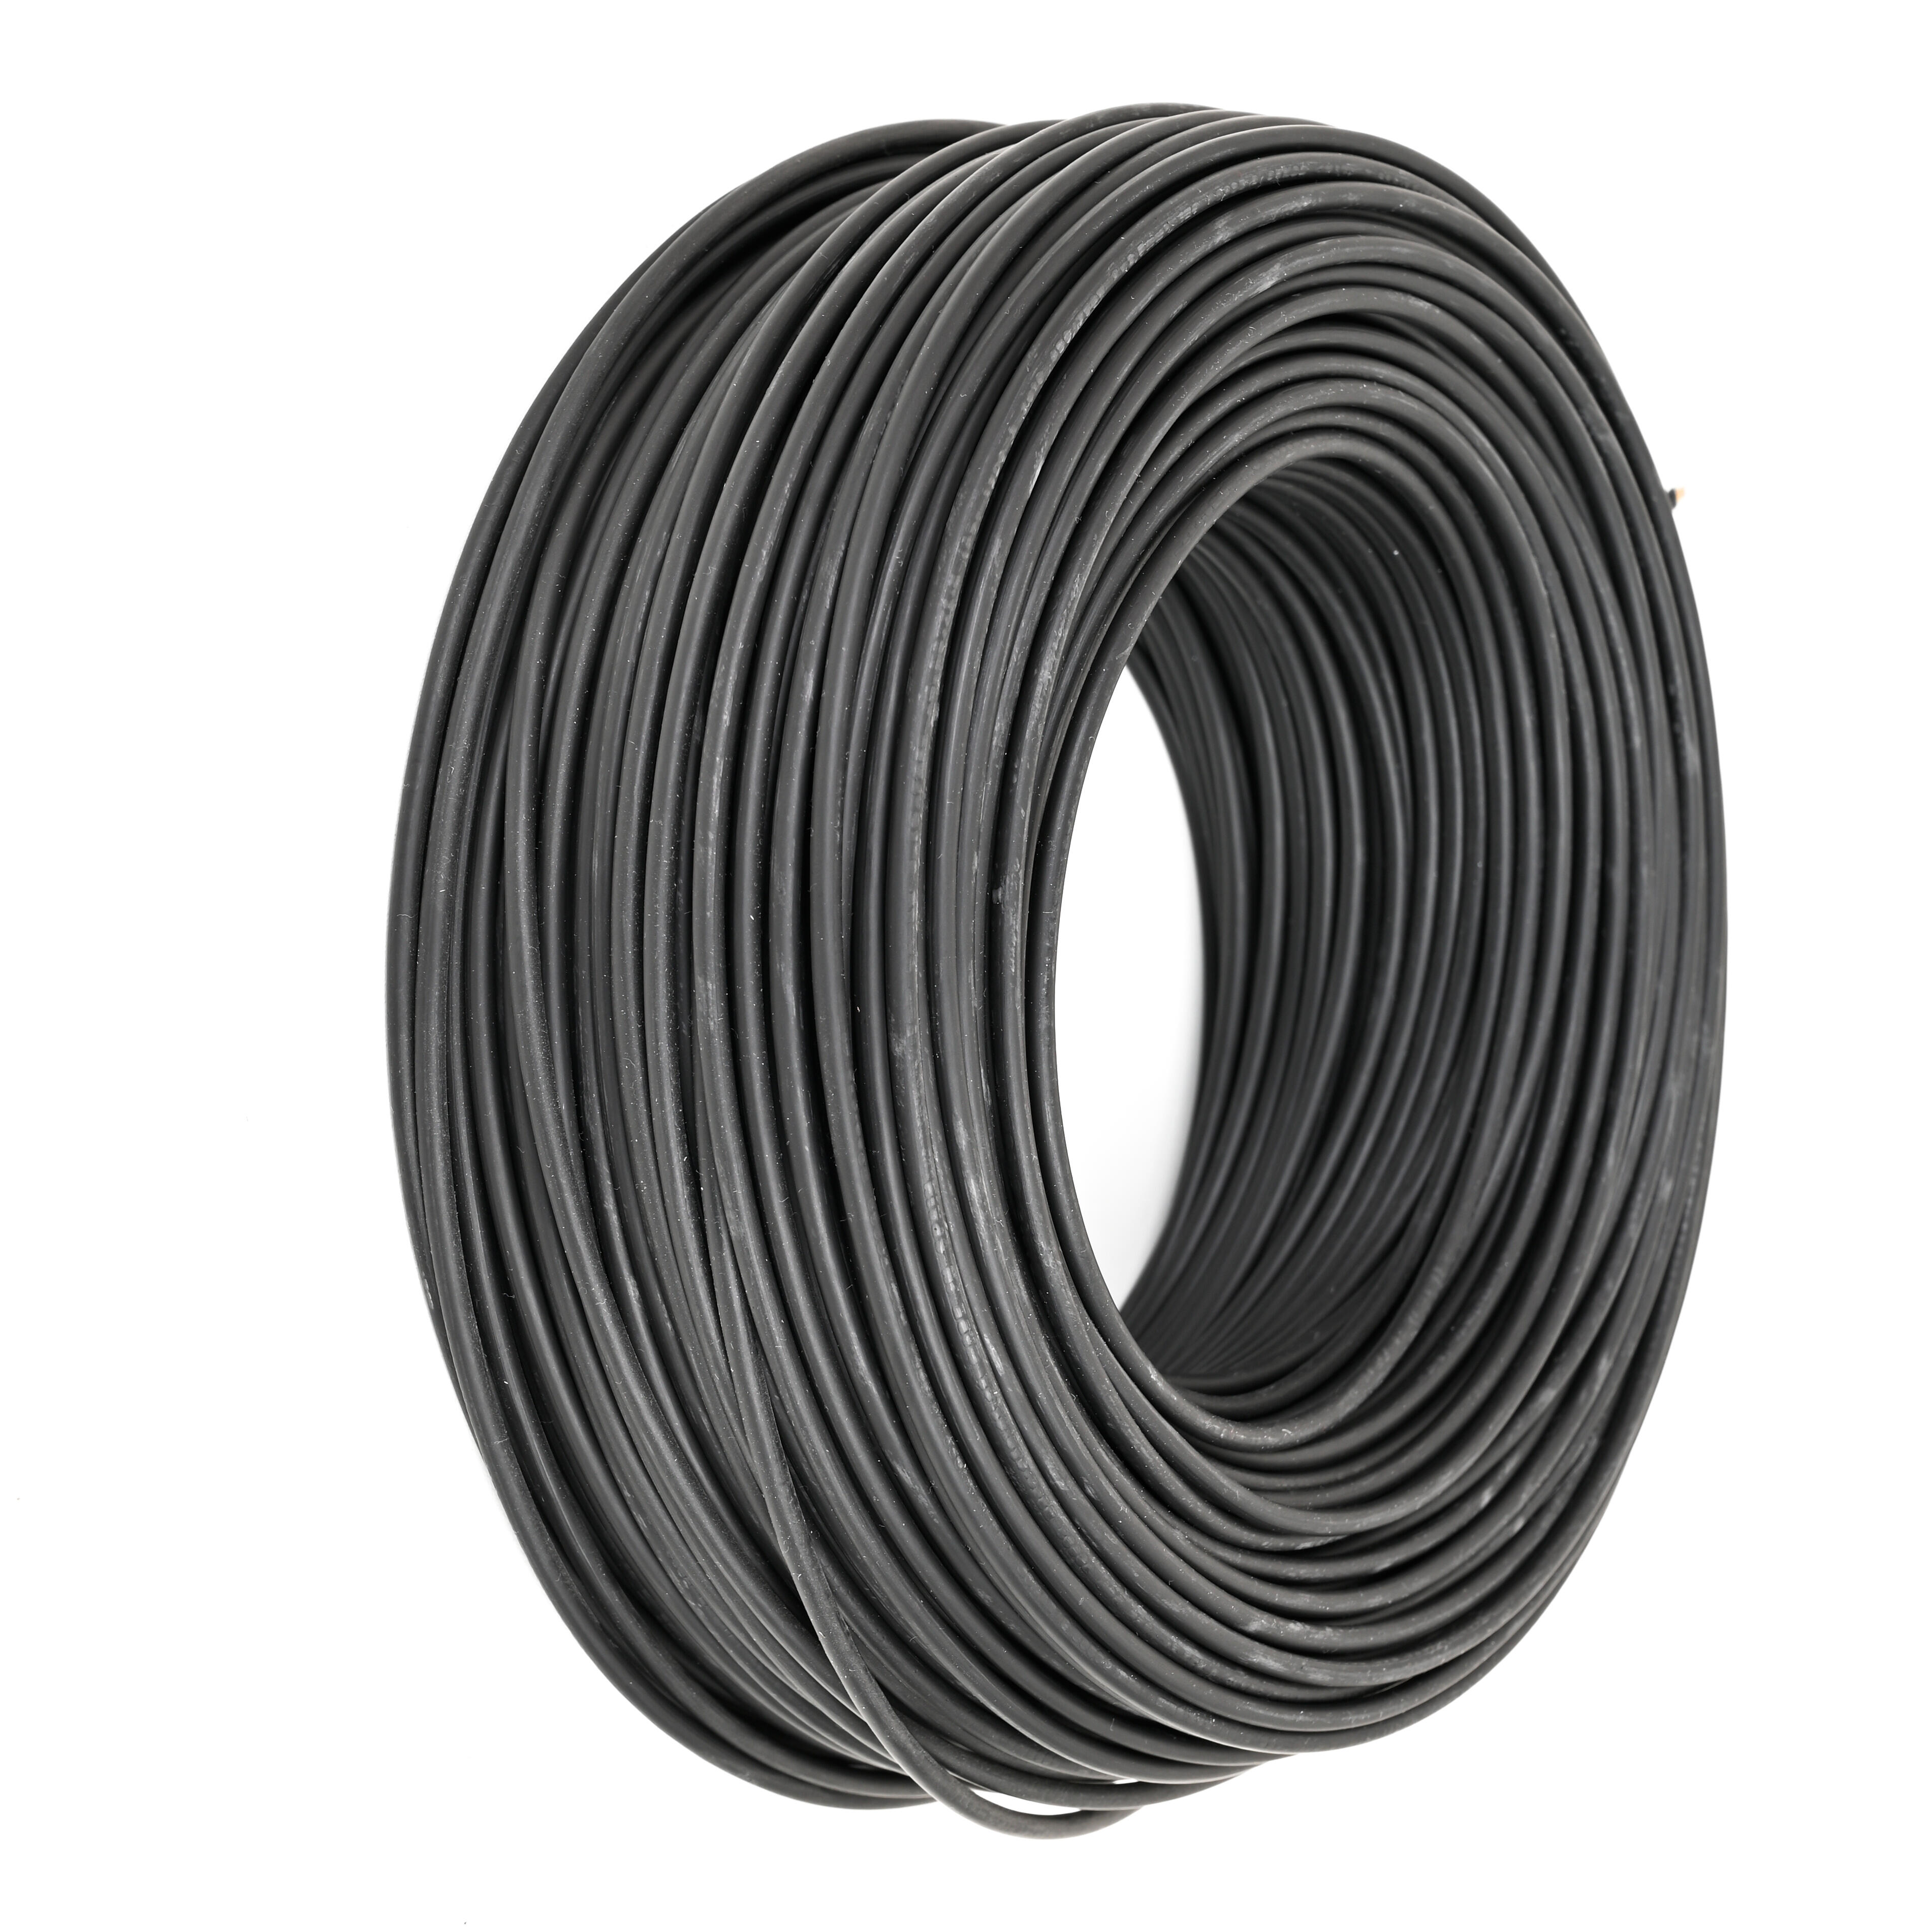 Cable h07z1-k 100m 2,5 mm² negro